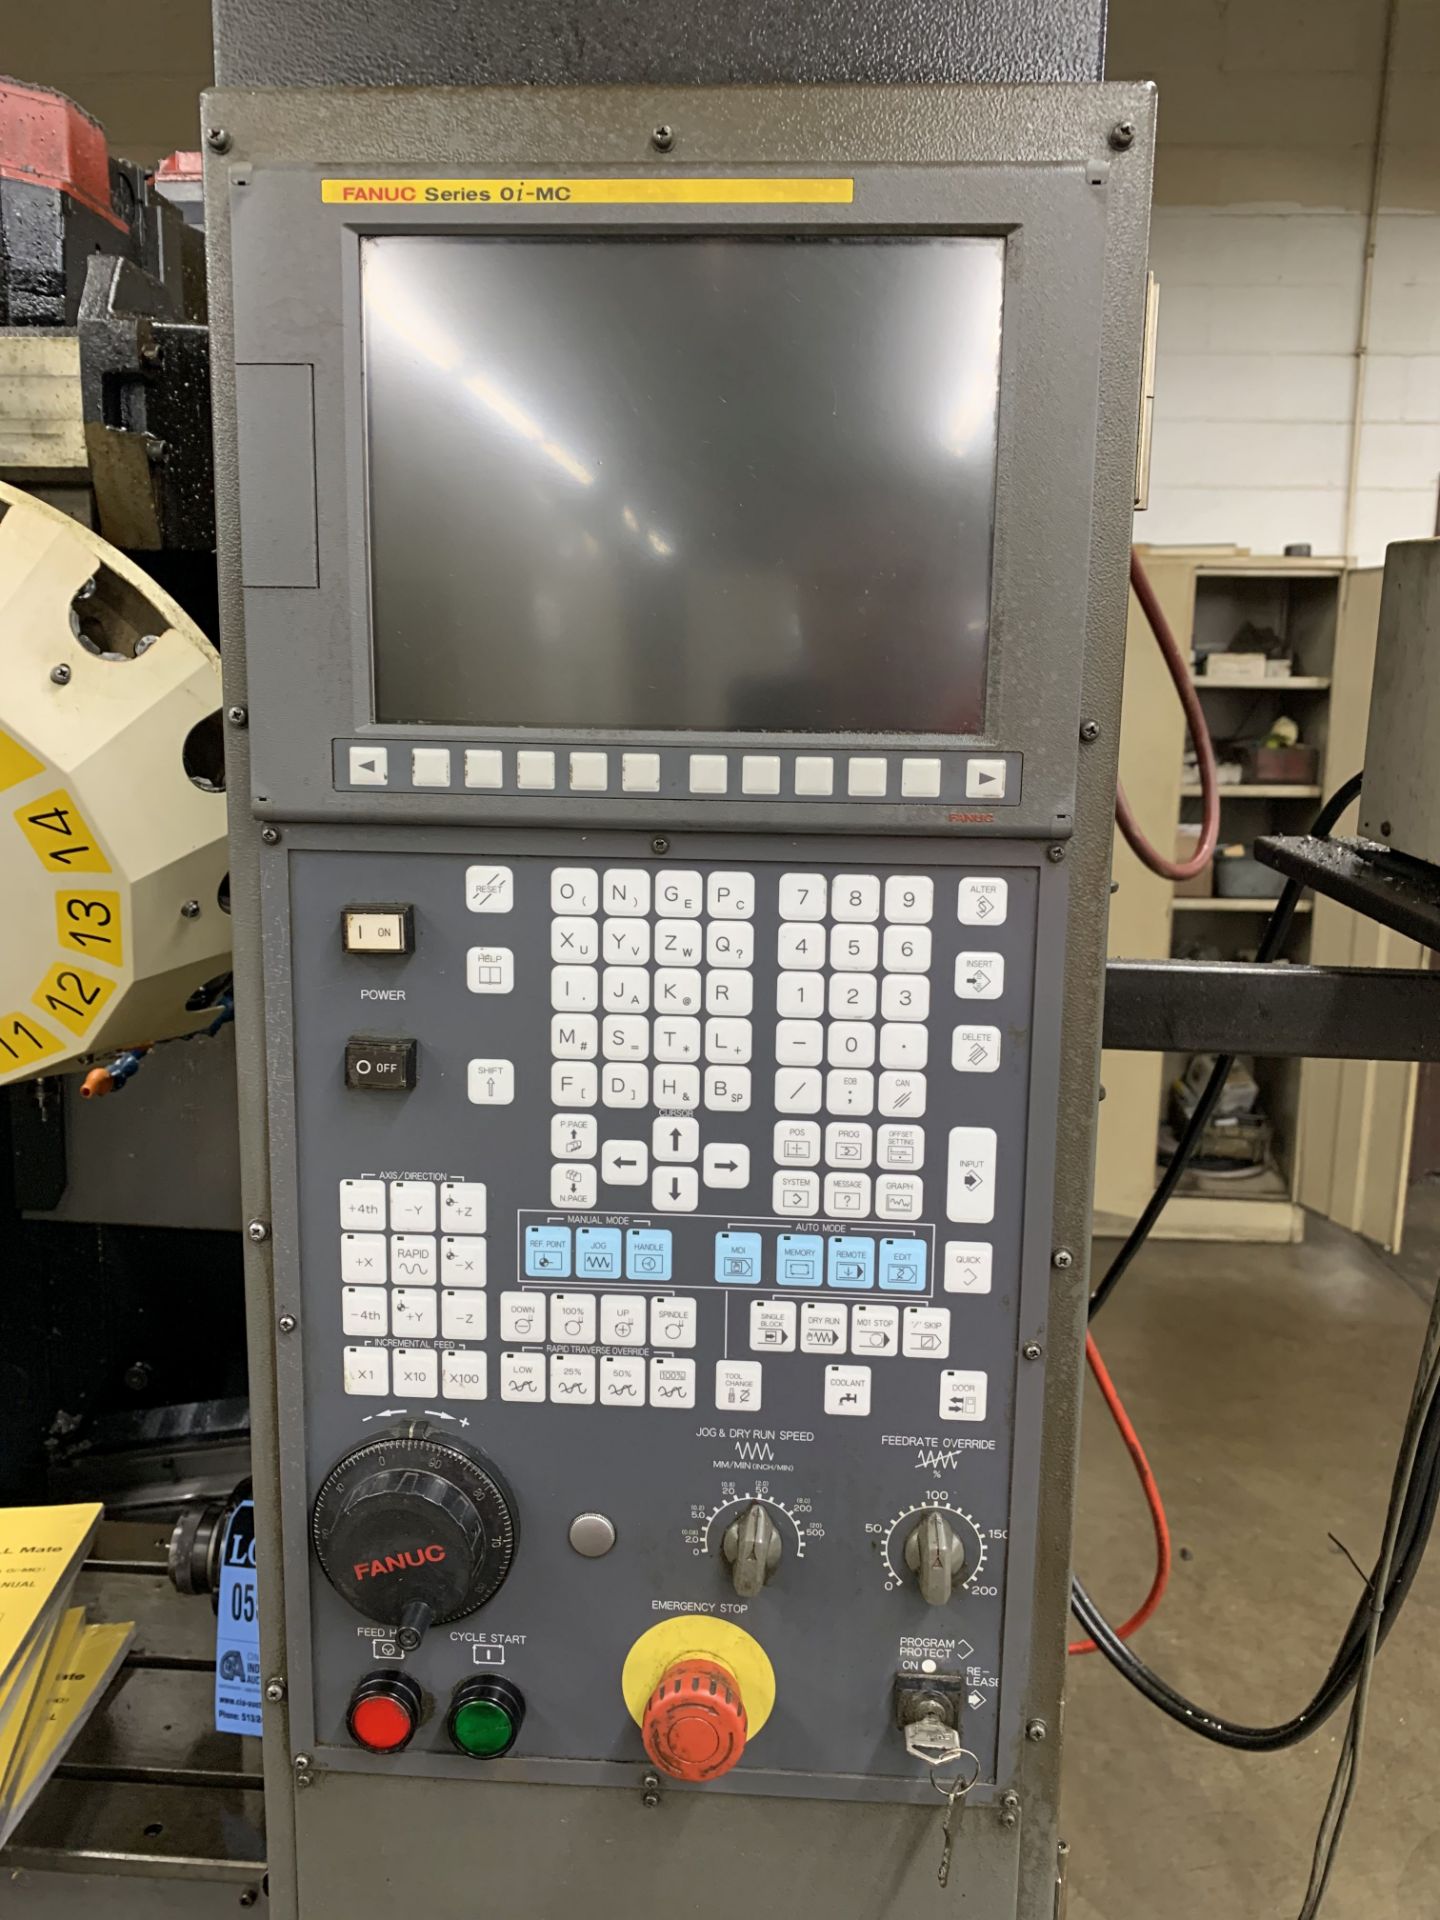 FANUC MODEL ROBODRILL MATE CNC DRILL AND TAPPING CENTER; S/N 071VN201, FANUC Oi-MC CONTROL, 25.6" - Image 5 of 8